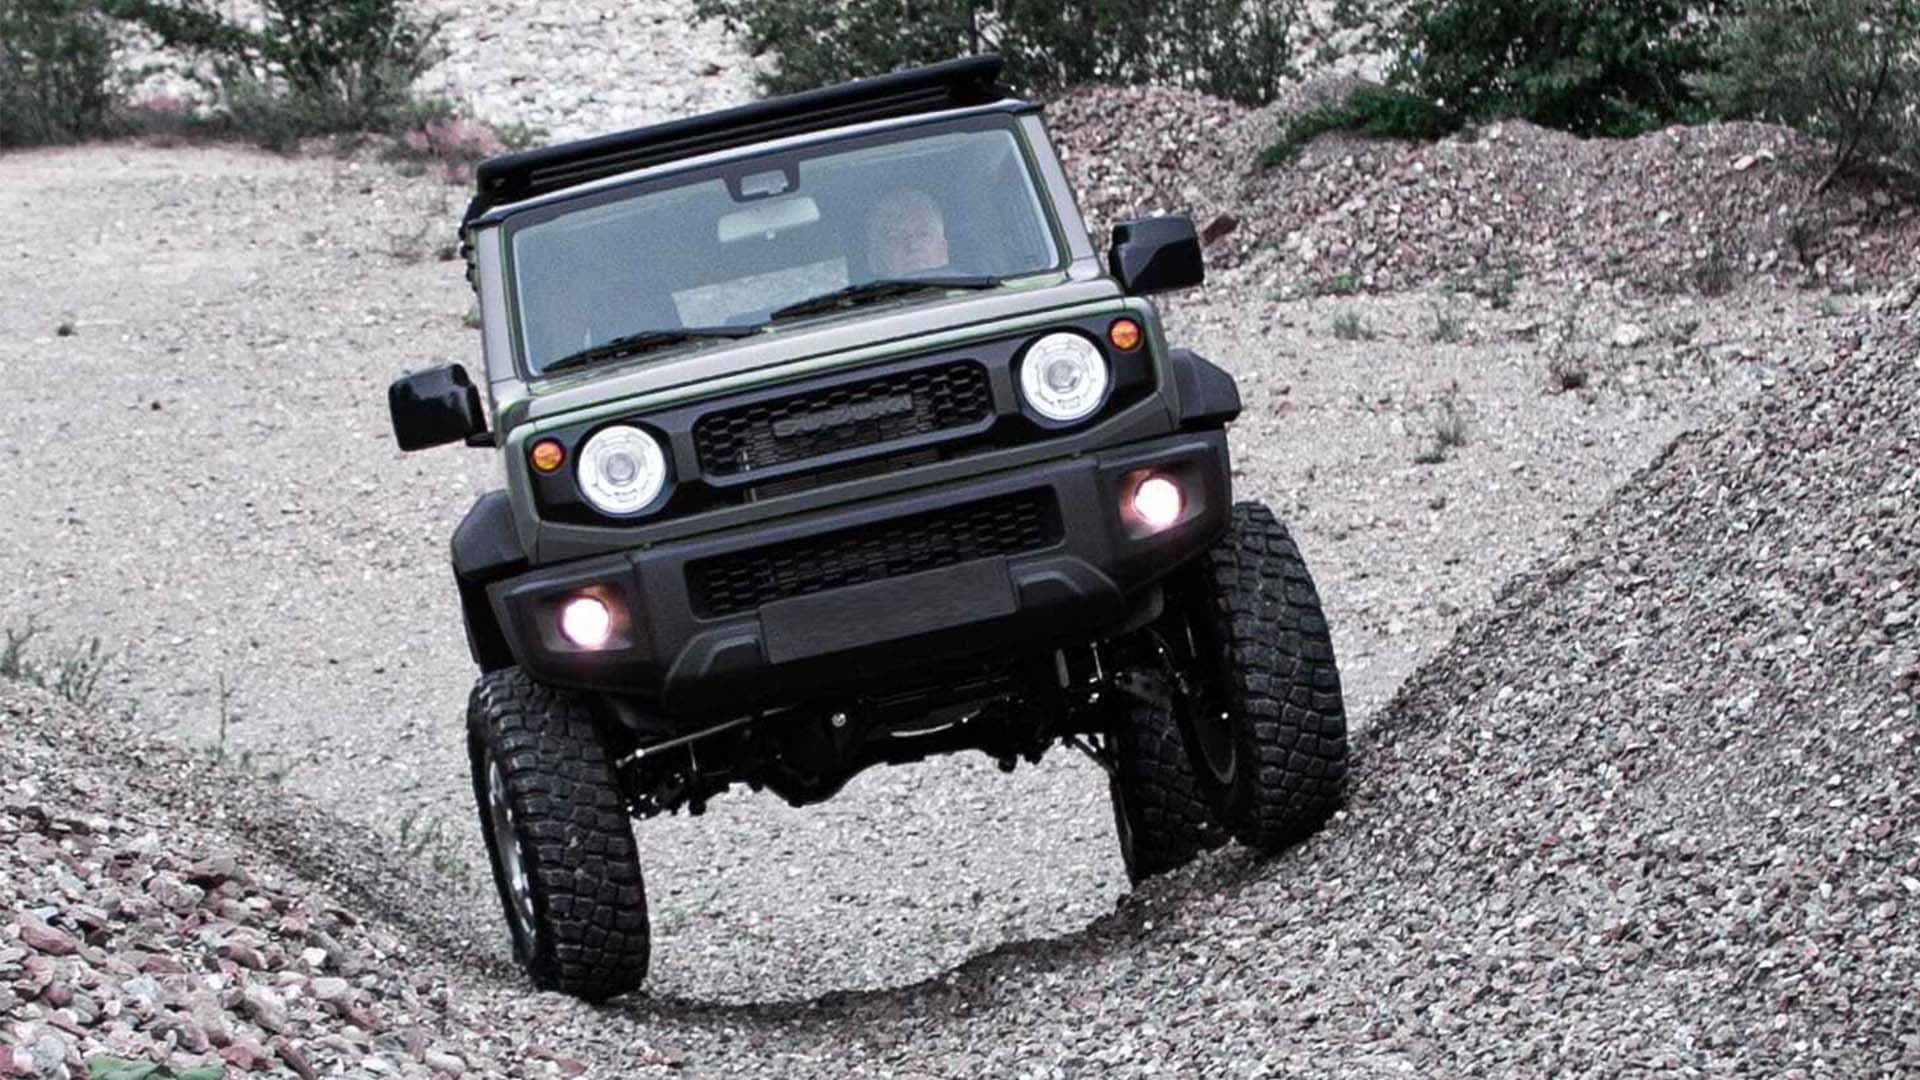 Suzuki Jimny on Portal Axles Has a Crazy 15.7 Inches of Ground Clearance